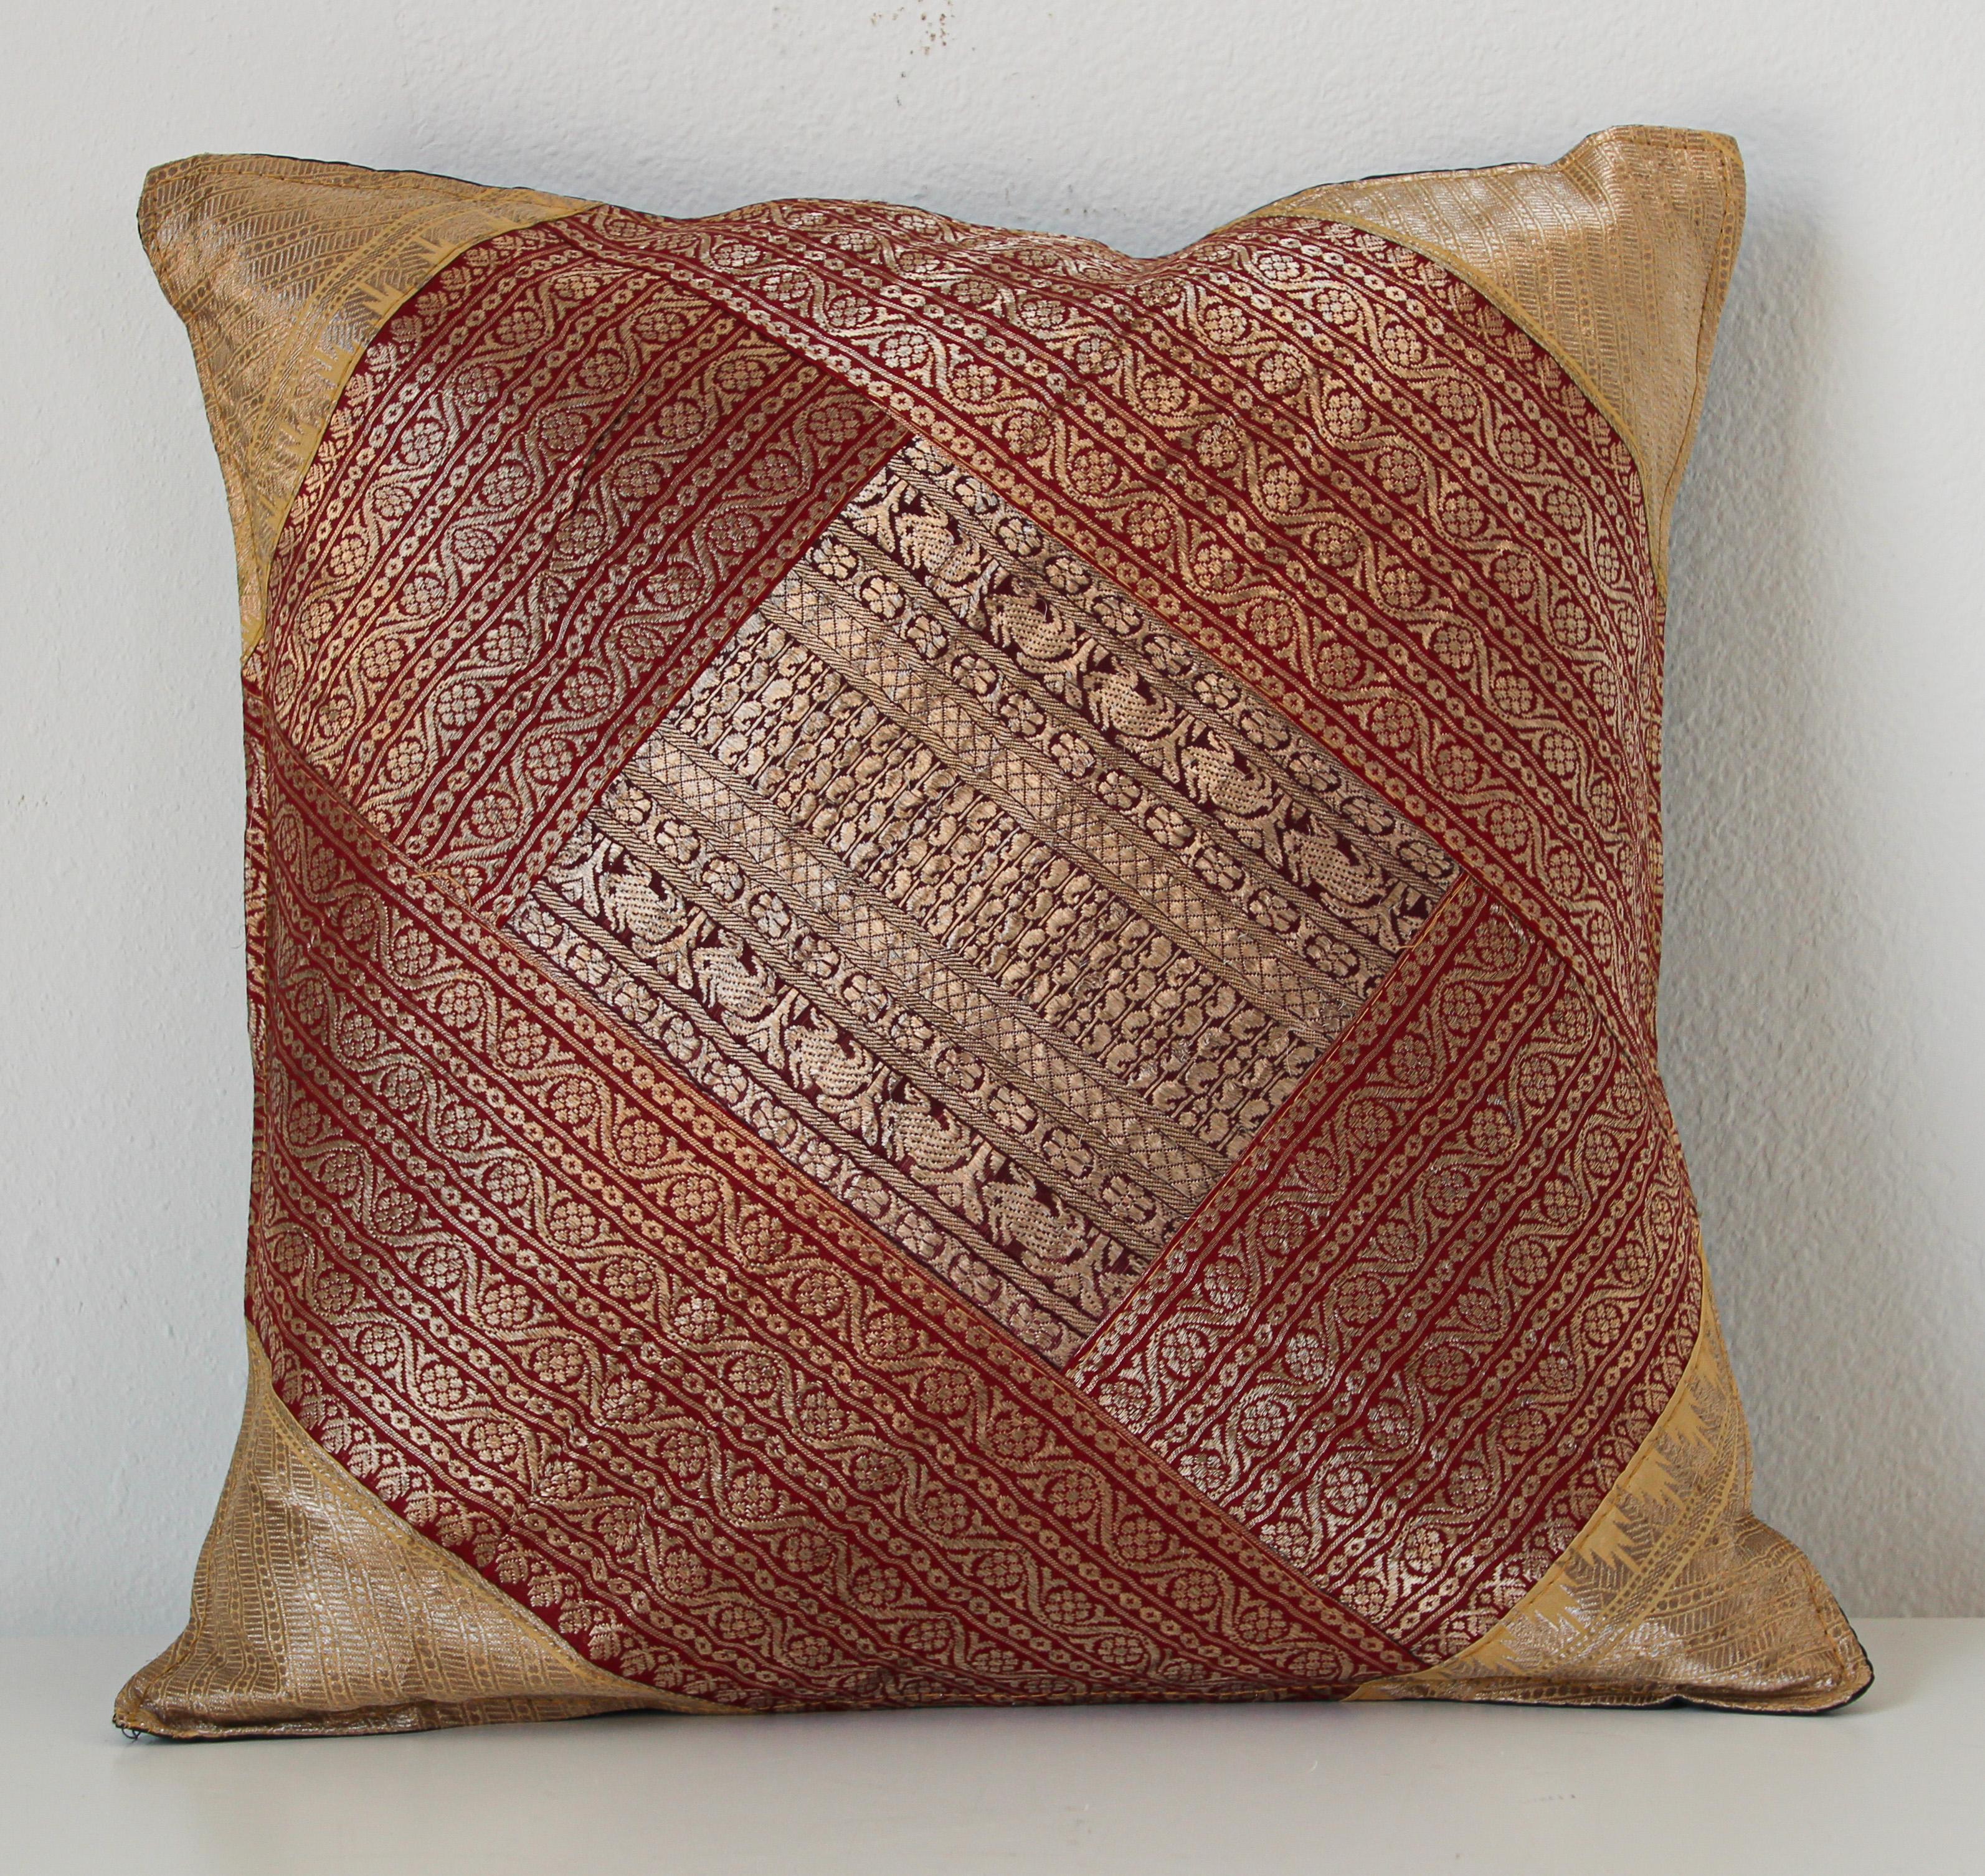 Decorative accent throw pillow made from vintage sari borders.
One of a kind silk decorative pillow, red with gold metallic threads.
Handcrafted in India.
We do have multiple in this style, but each one is unique.
 